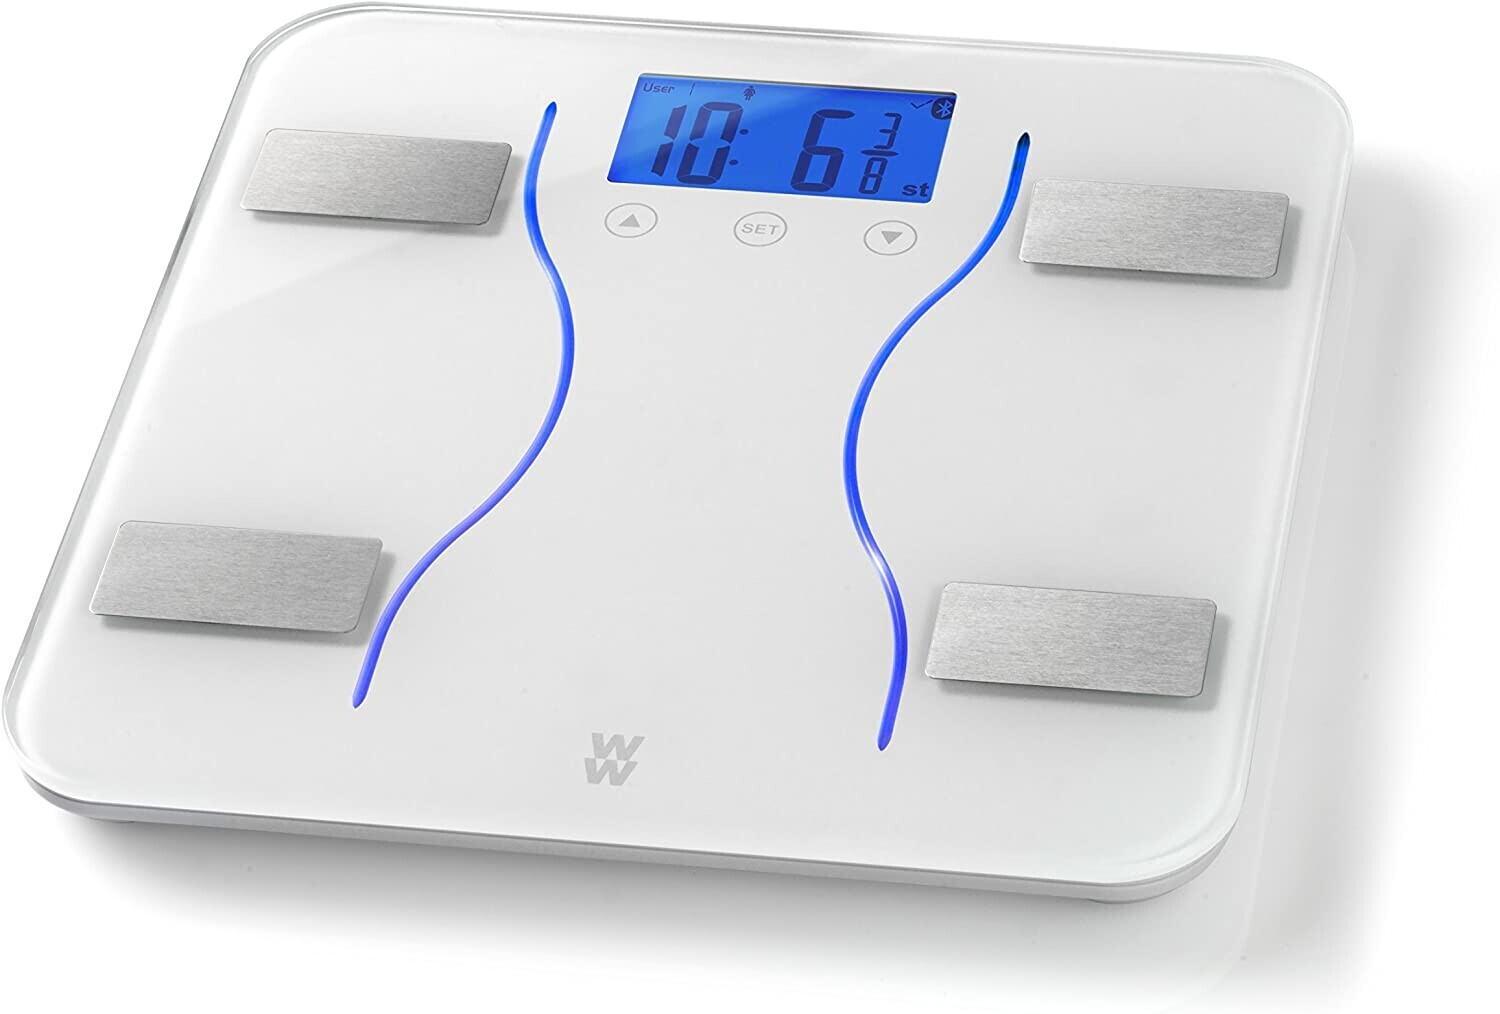 Buy WeightWatchers Bluetooth Body Analysis Scale from £27.50